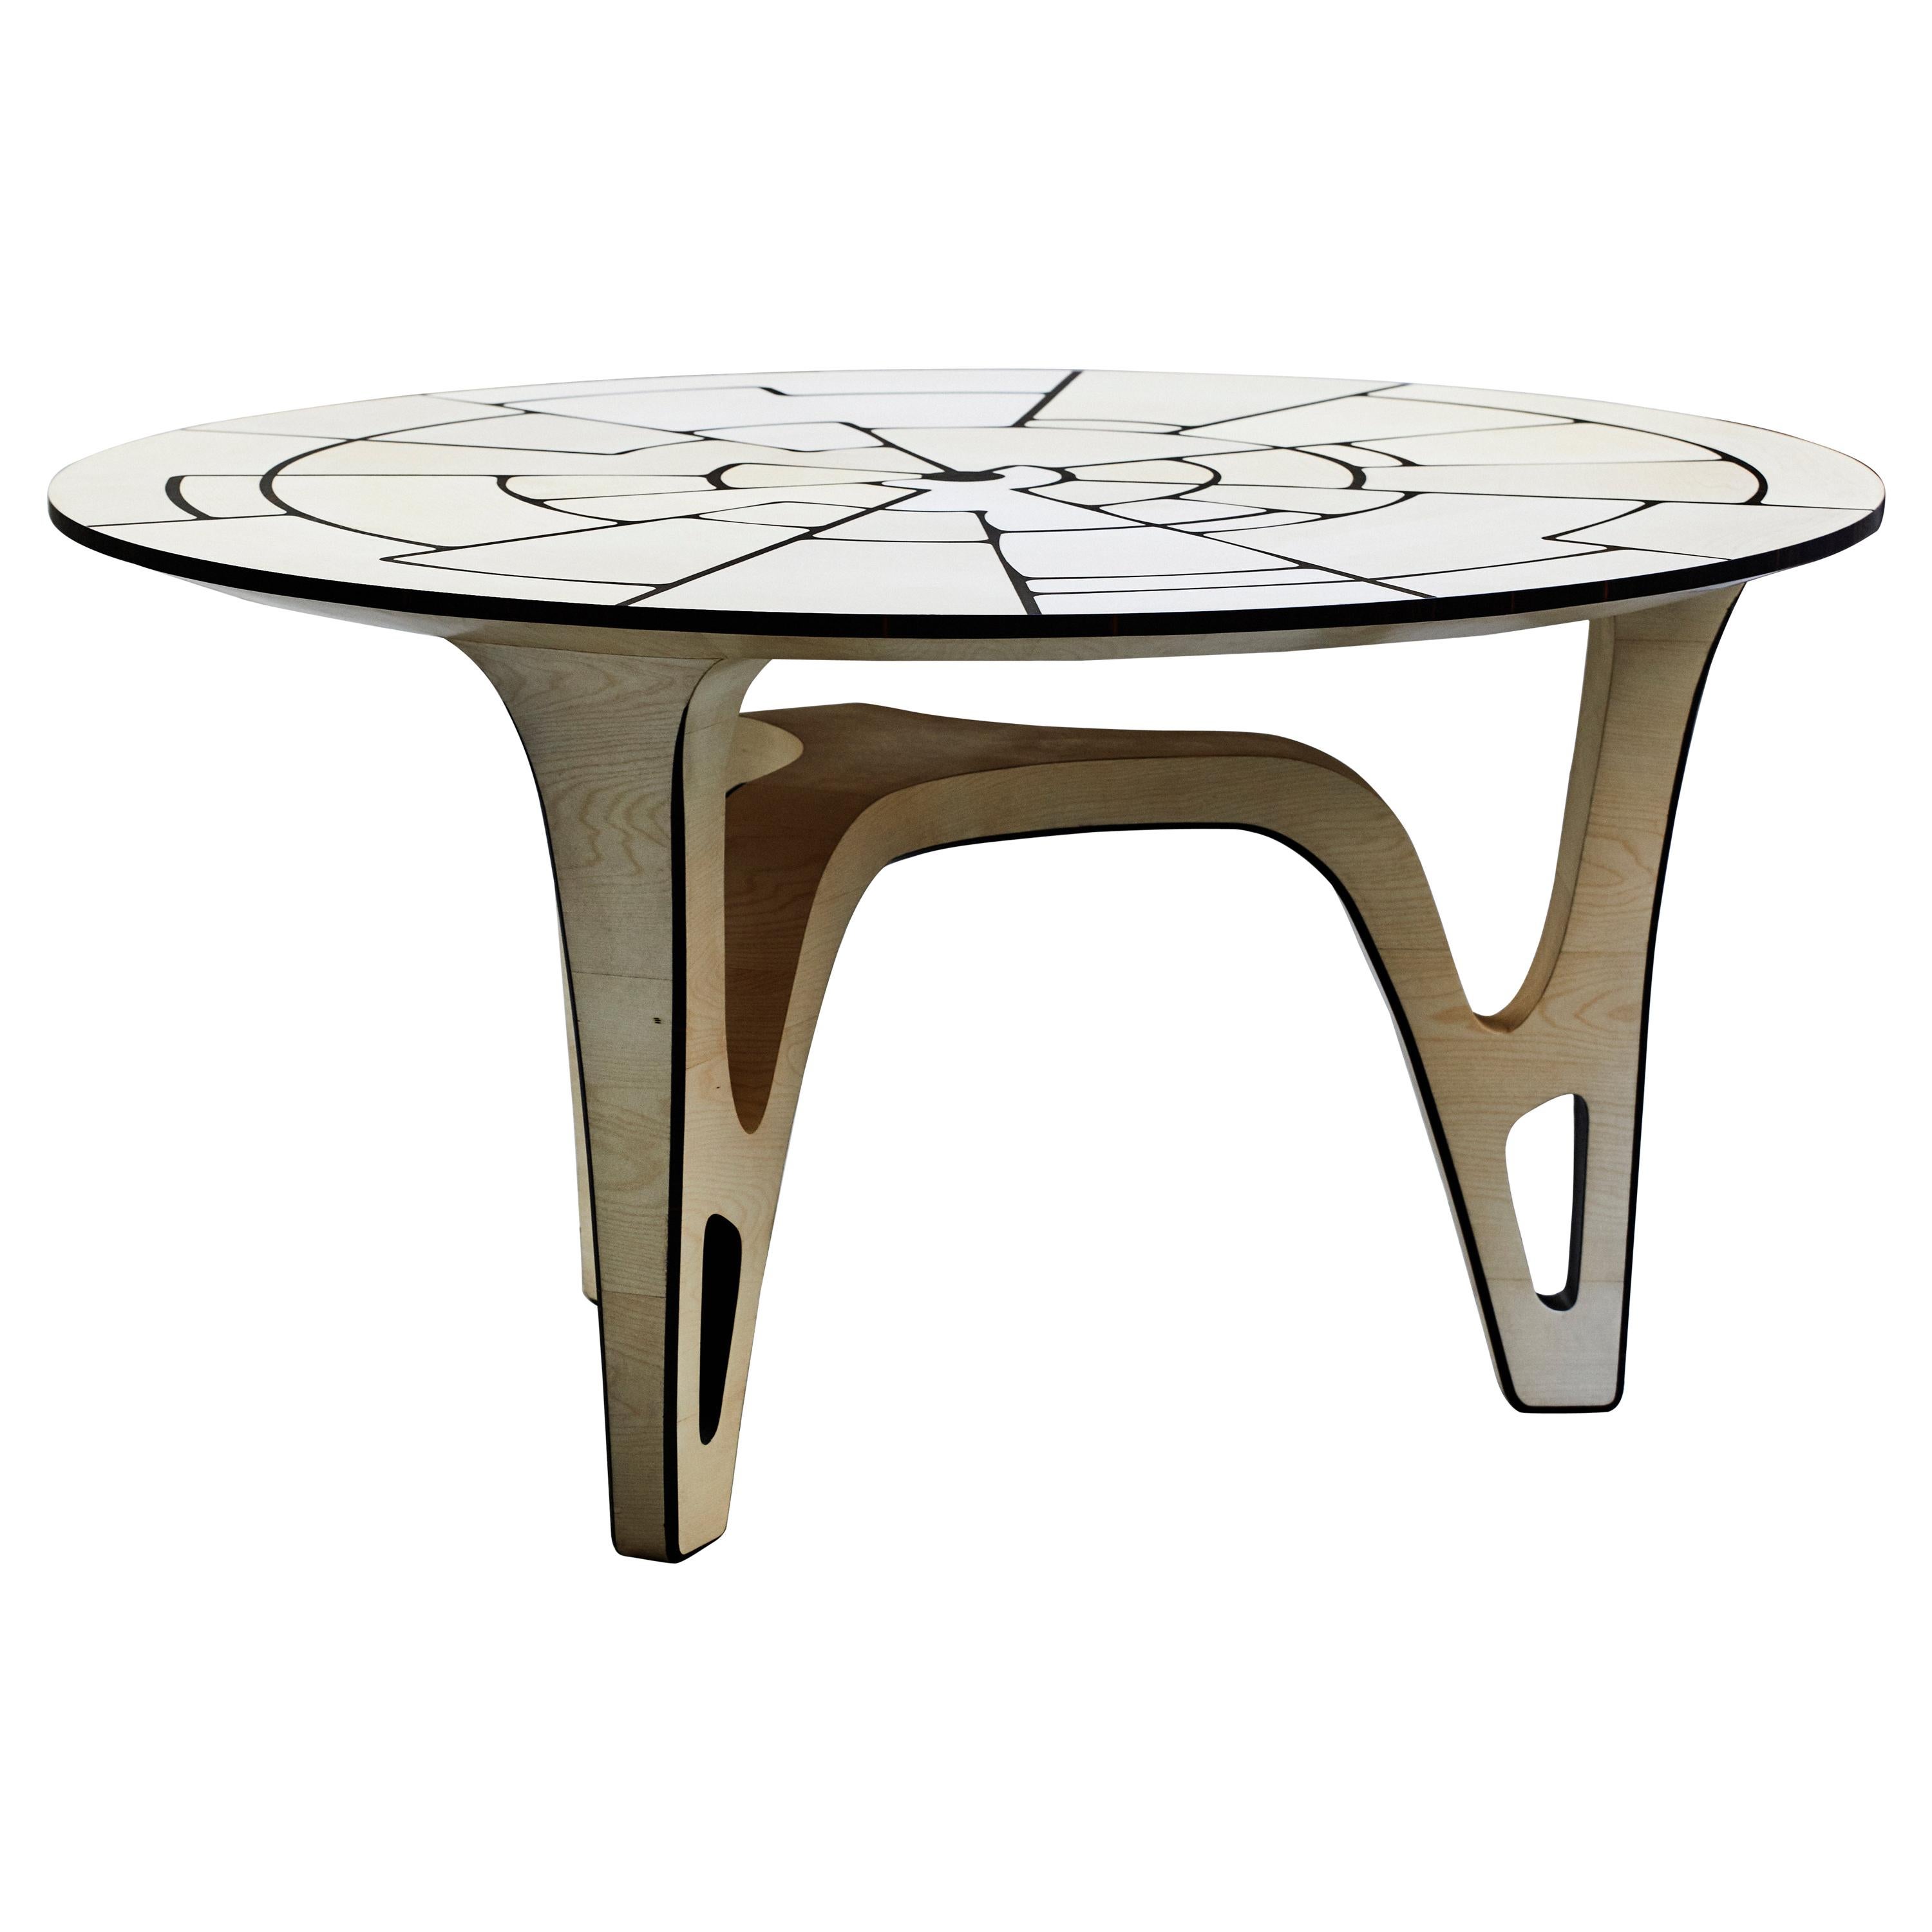 "The Secret Garden" 21st Century Round Table, Maple and Ebony by Ivan Paradisi